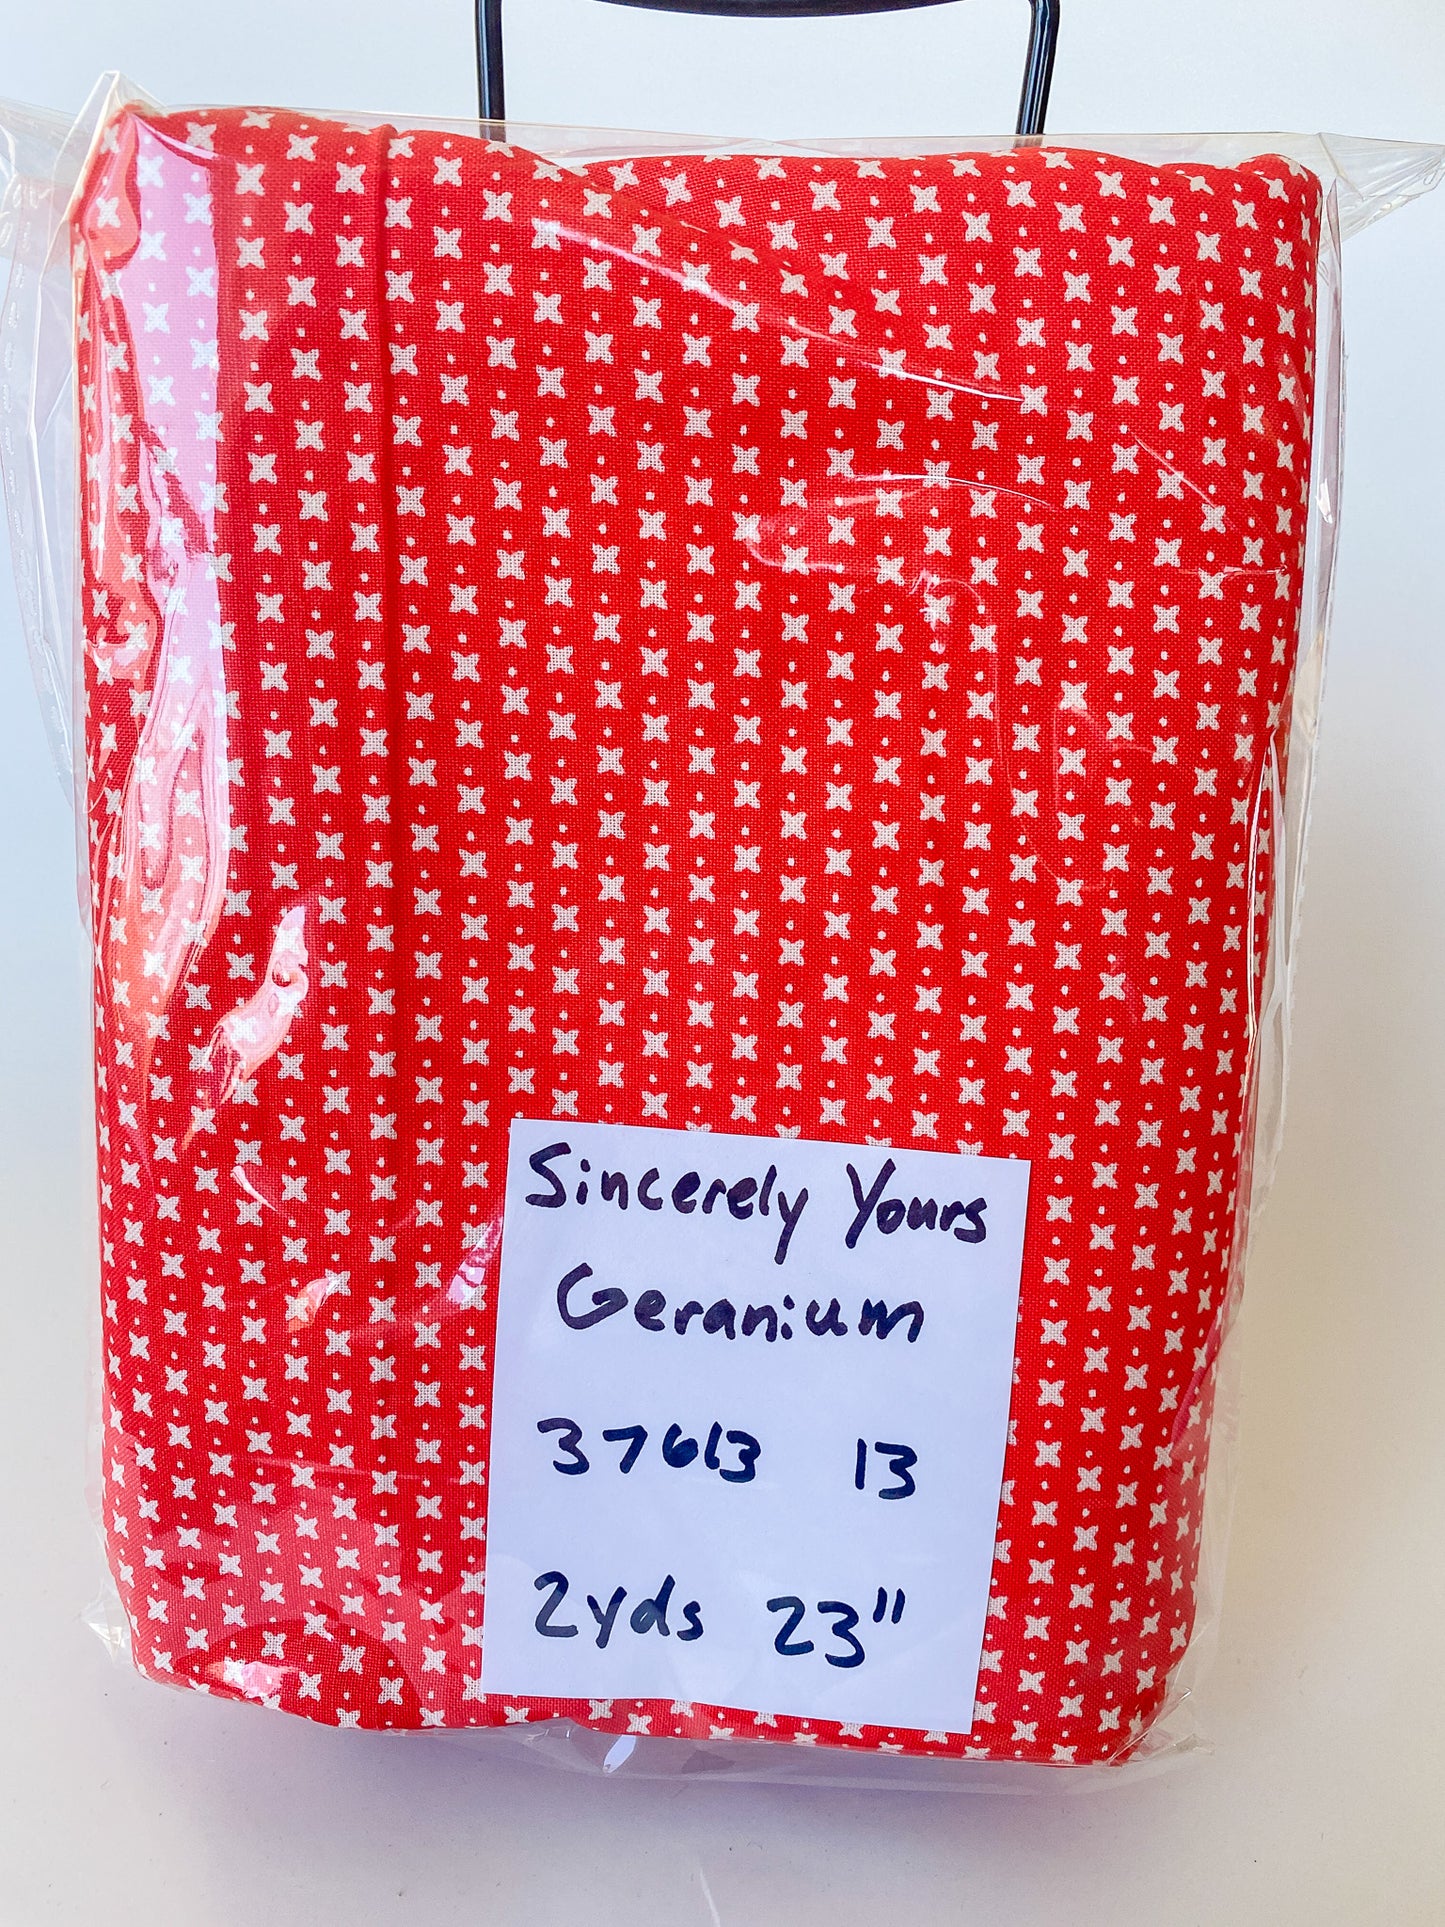 Sincerely Yours Geranium- 2 yds 23" Remnant